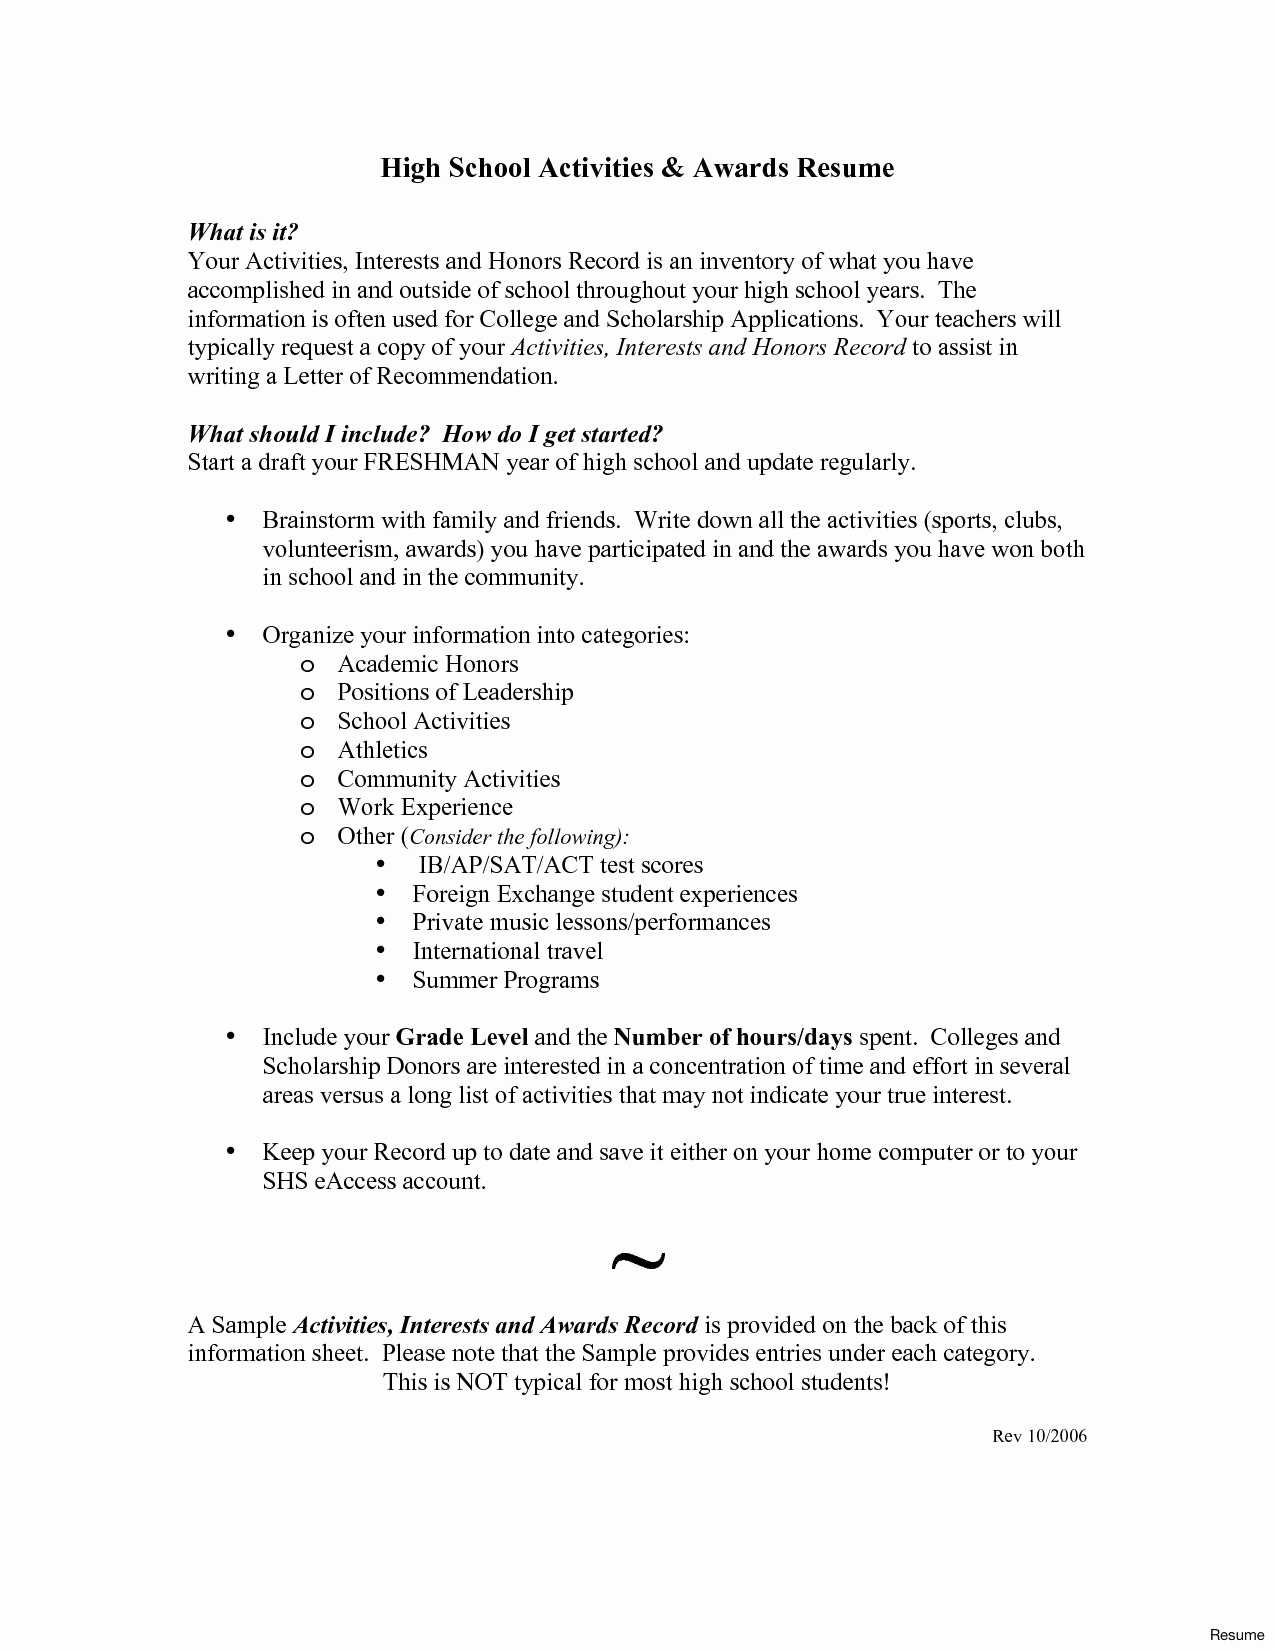 Supreme Court Cases Worksheet Answers or Icivics Judicial Branch In A Flash Worksheet Answers